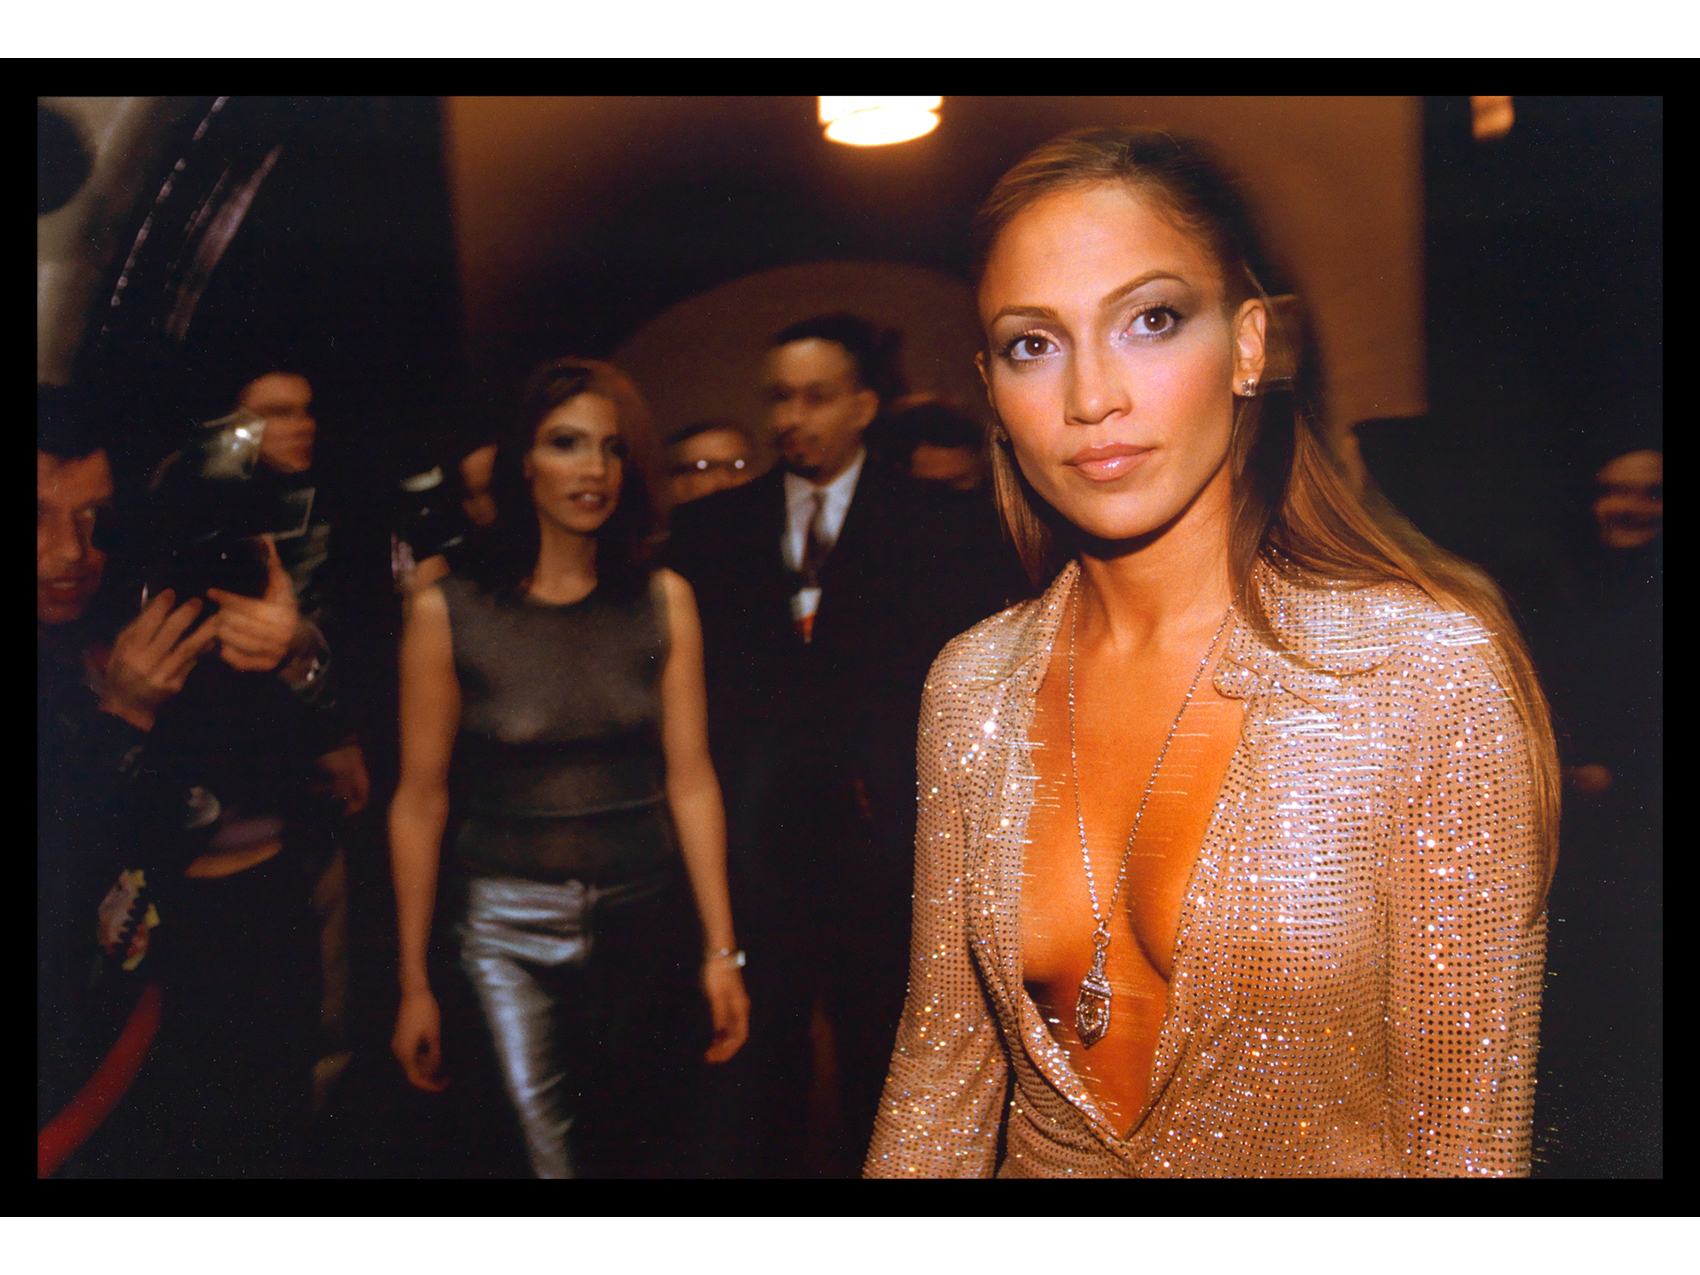 woman wearing a sparkly dress and silver necklace and looking up to her proper left. in the background, a blur of other people dressed in fancy clothing, one of whom is carrying a camera